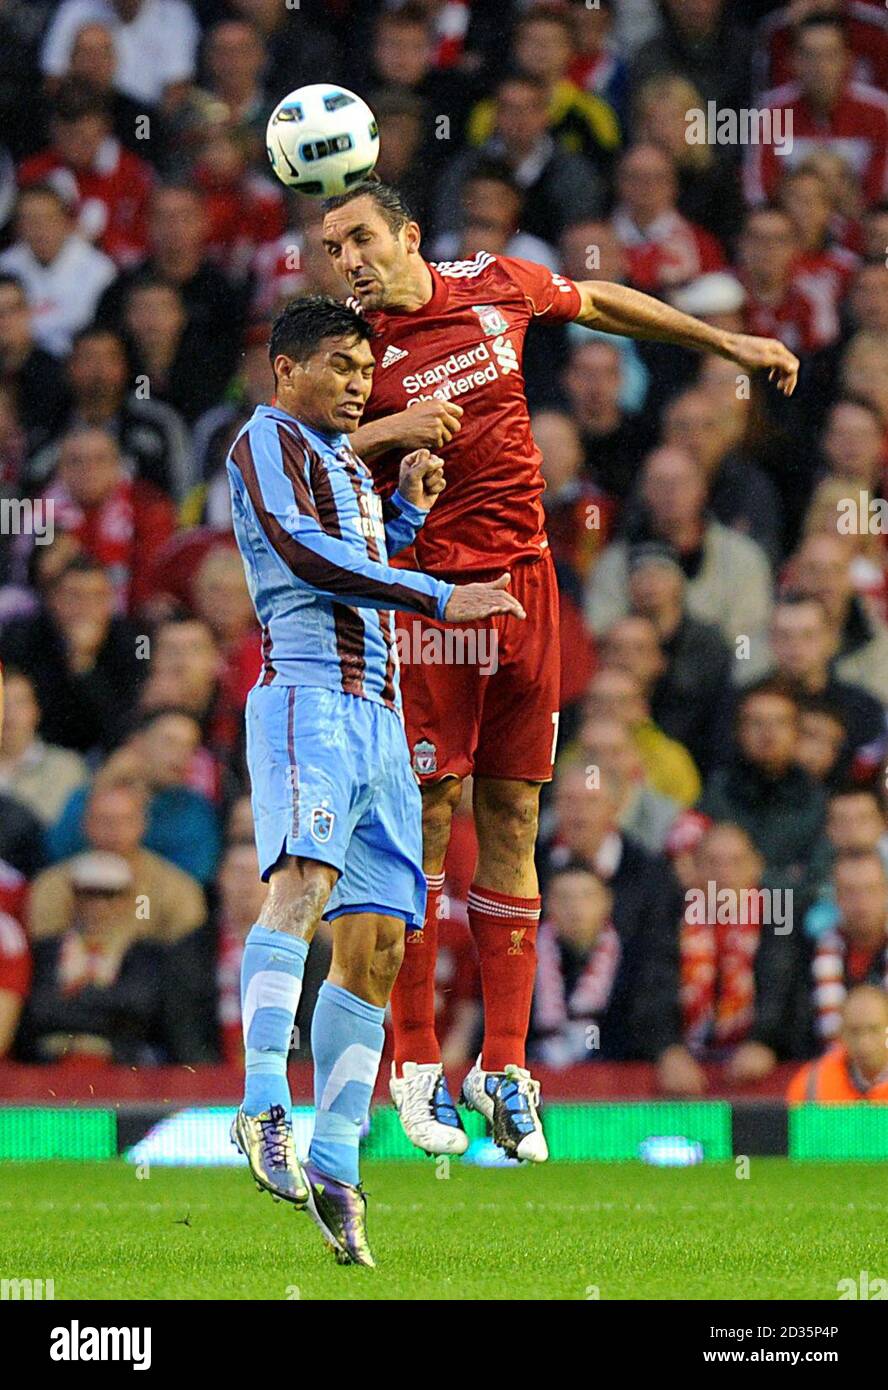 Trabzonspor's Teofilo Gutierrez (left) and Liverpool's Sotirios Kyrgiakos (right) battle for the ball in the air Stock Photo